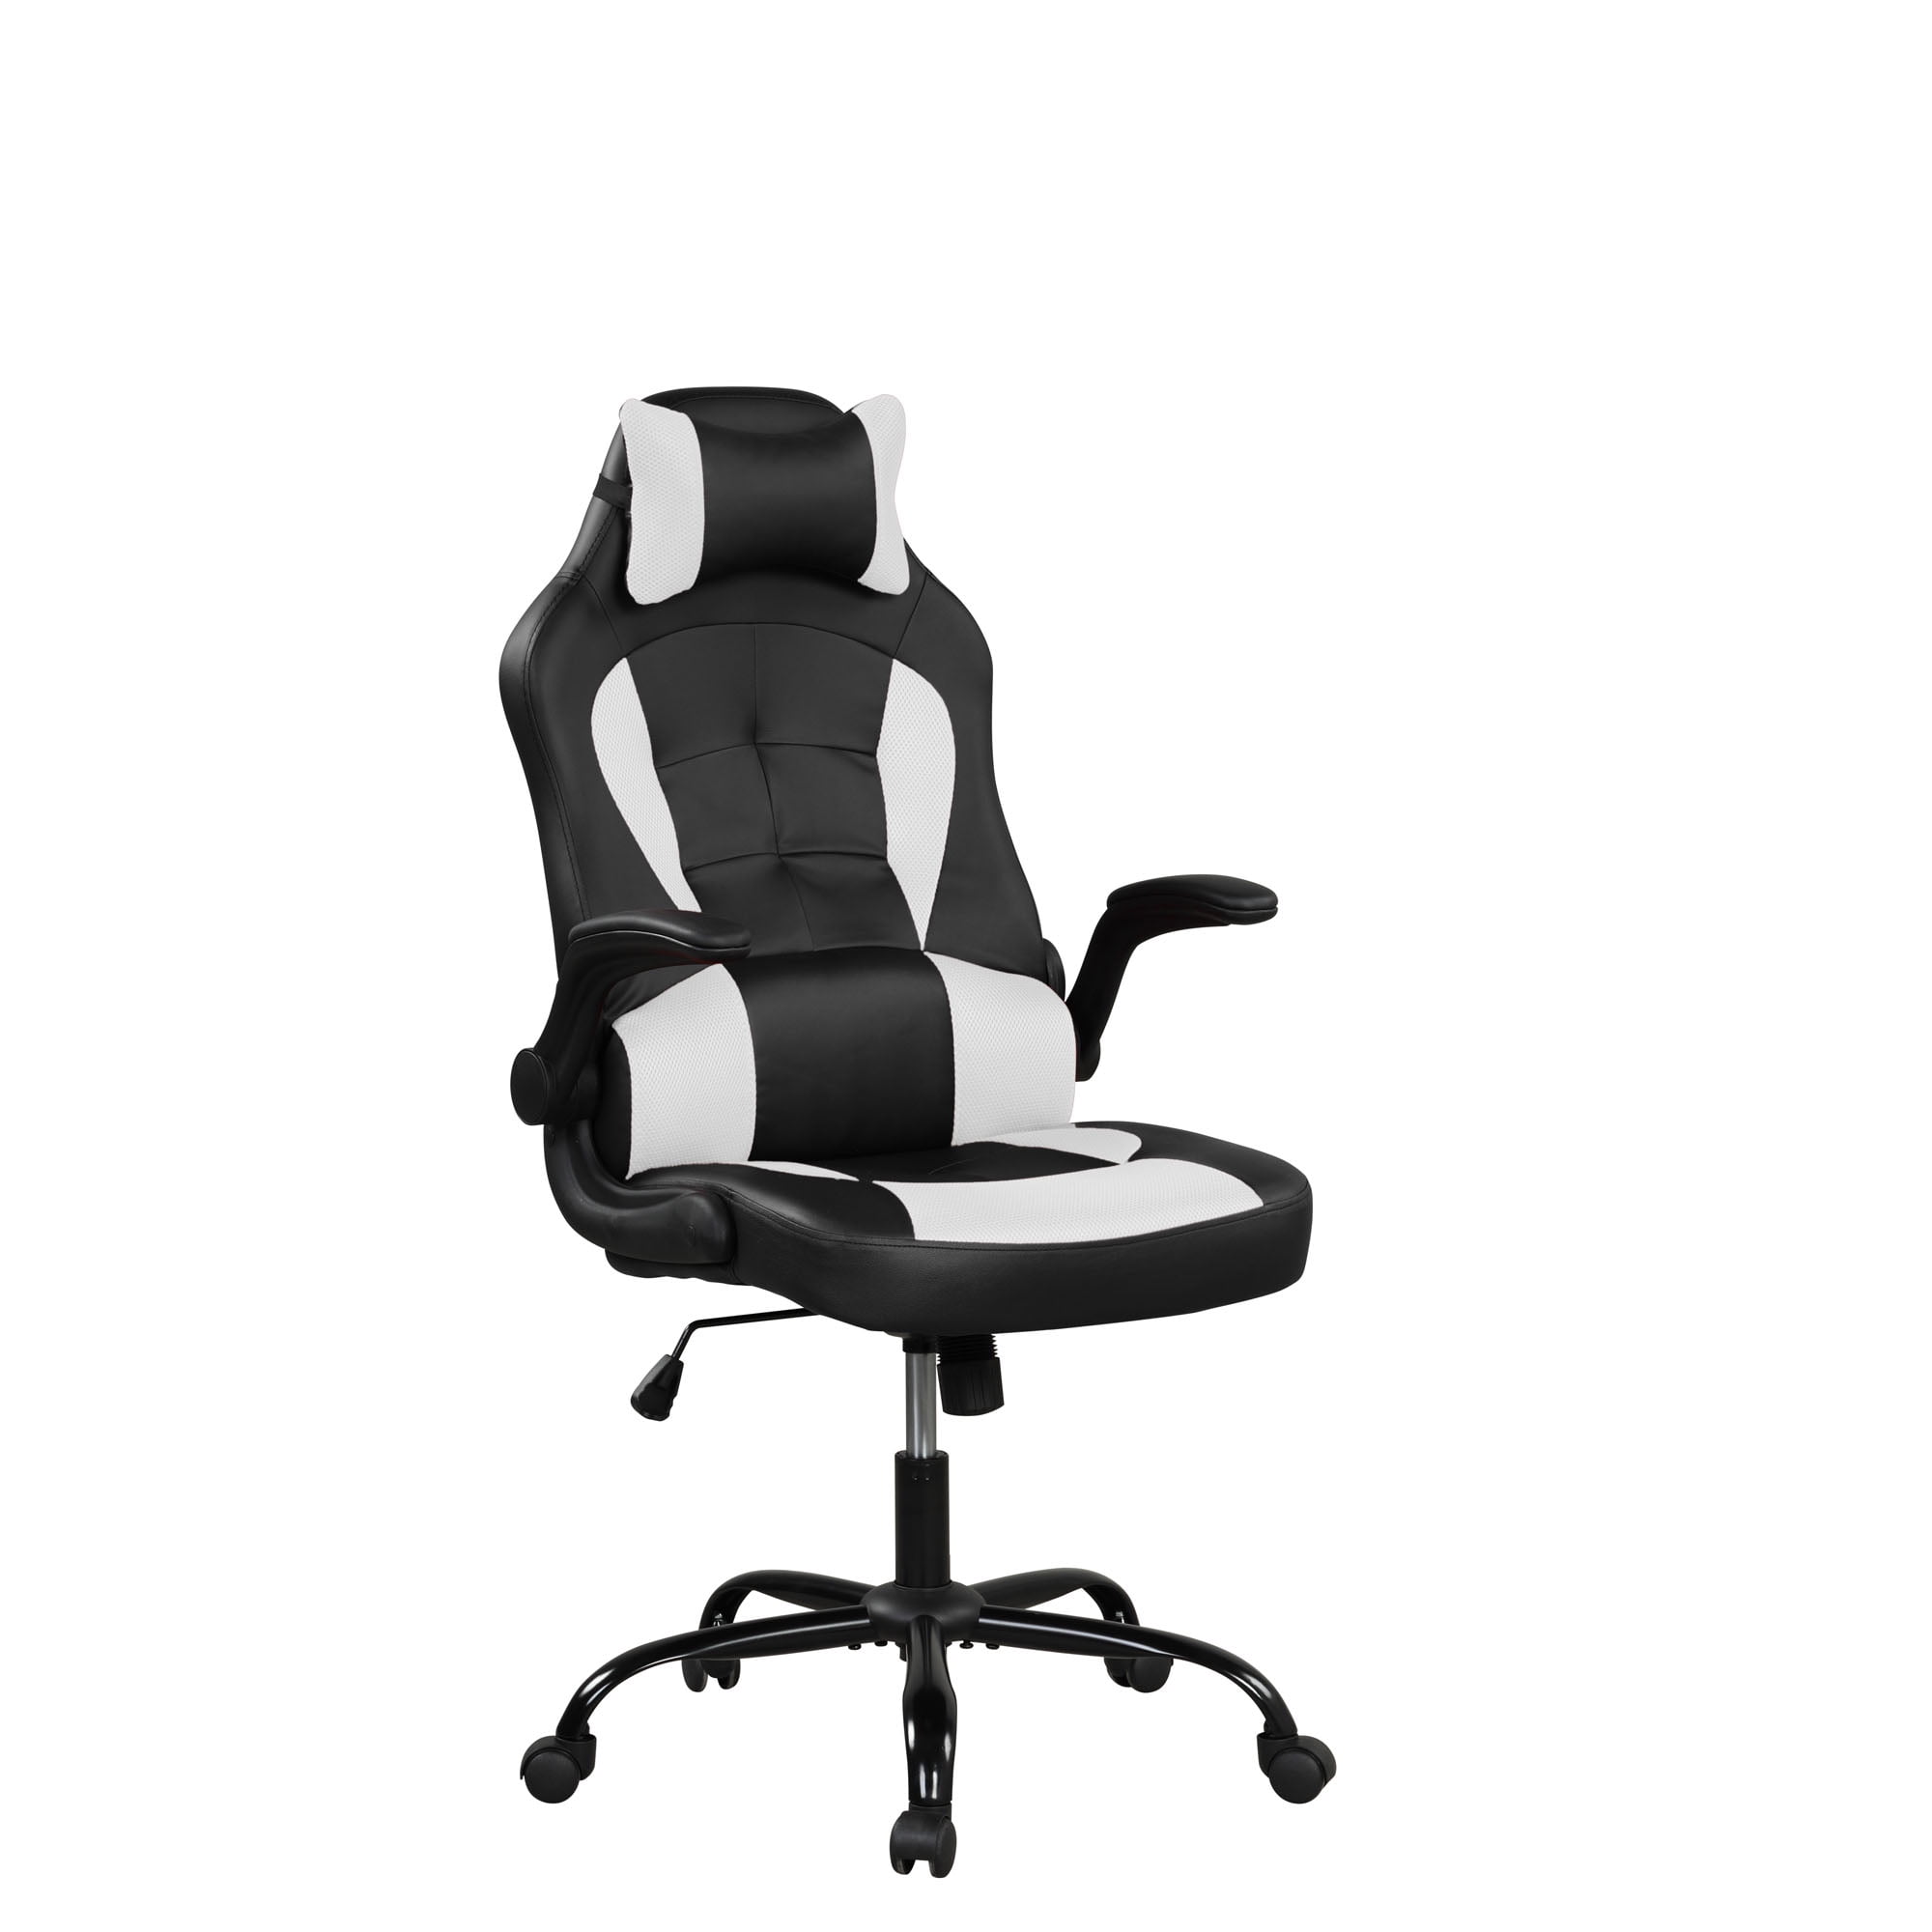 Lifestyle Solutions Viceroy High Back Swivel Gaming Chair